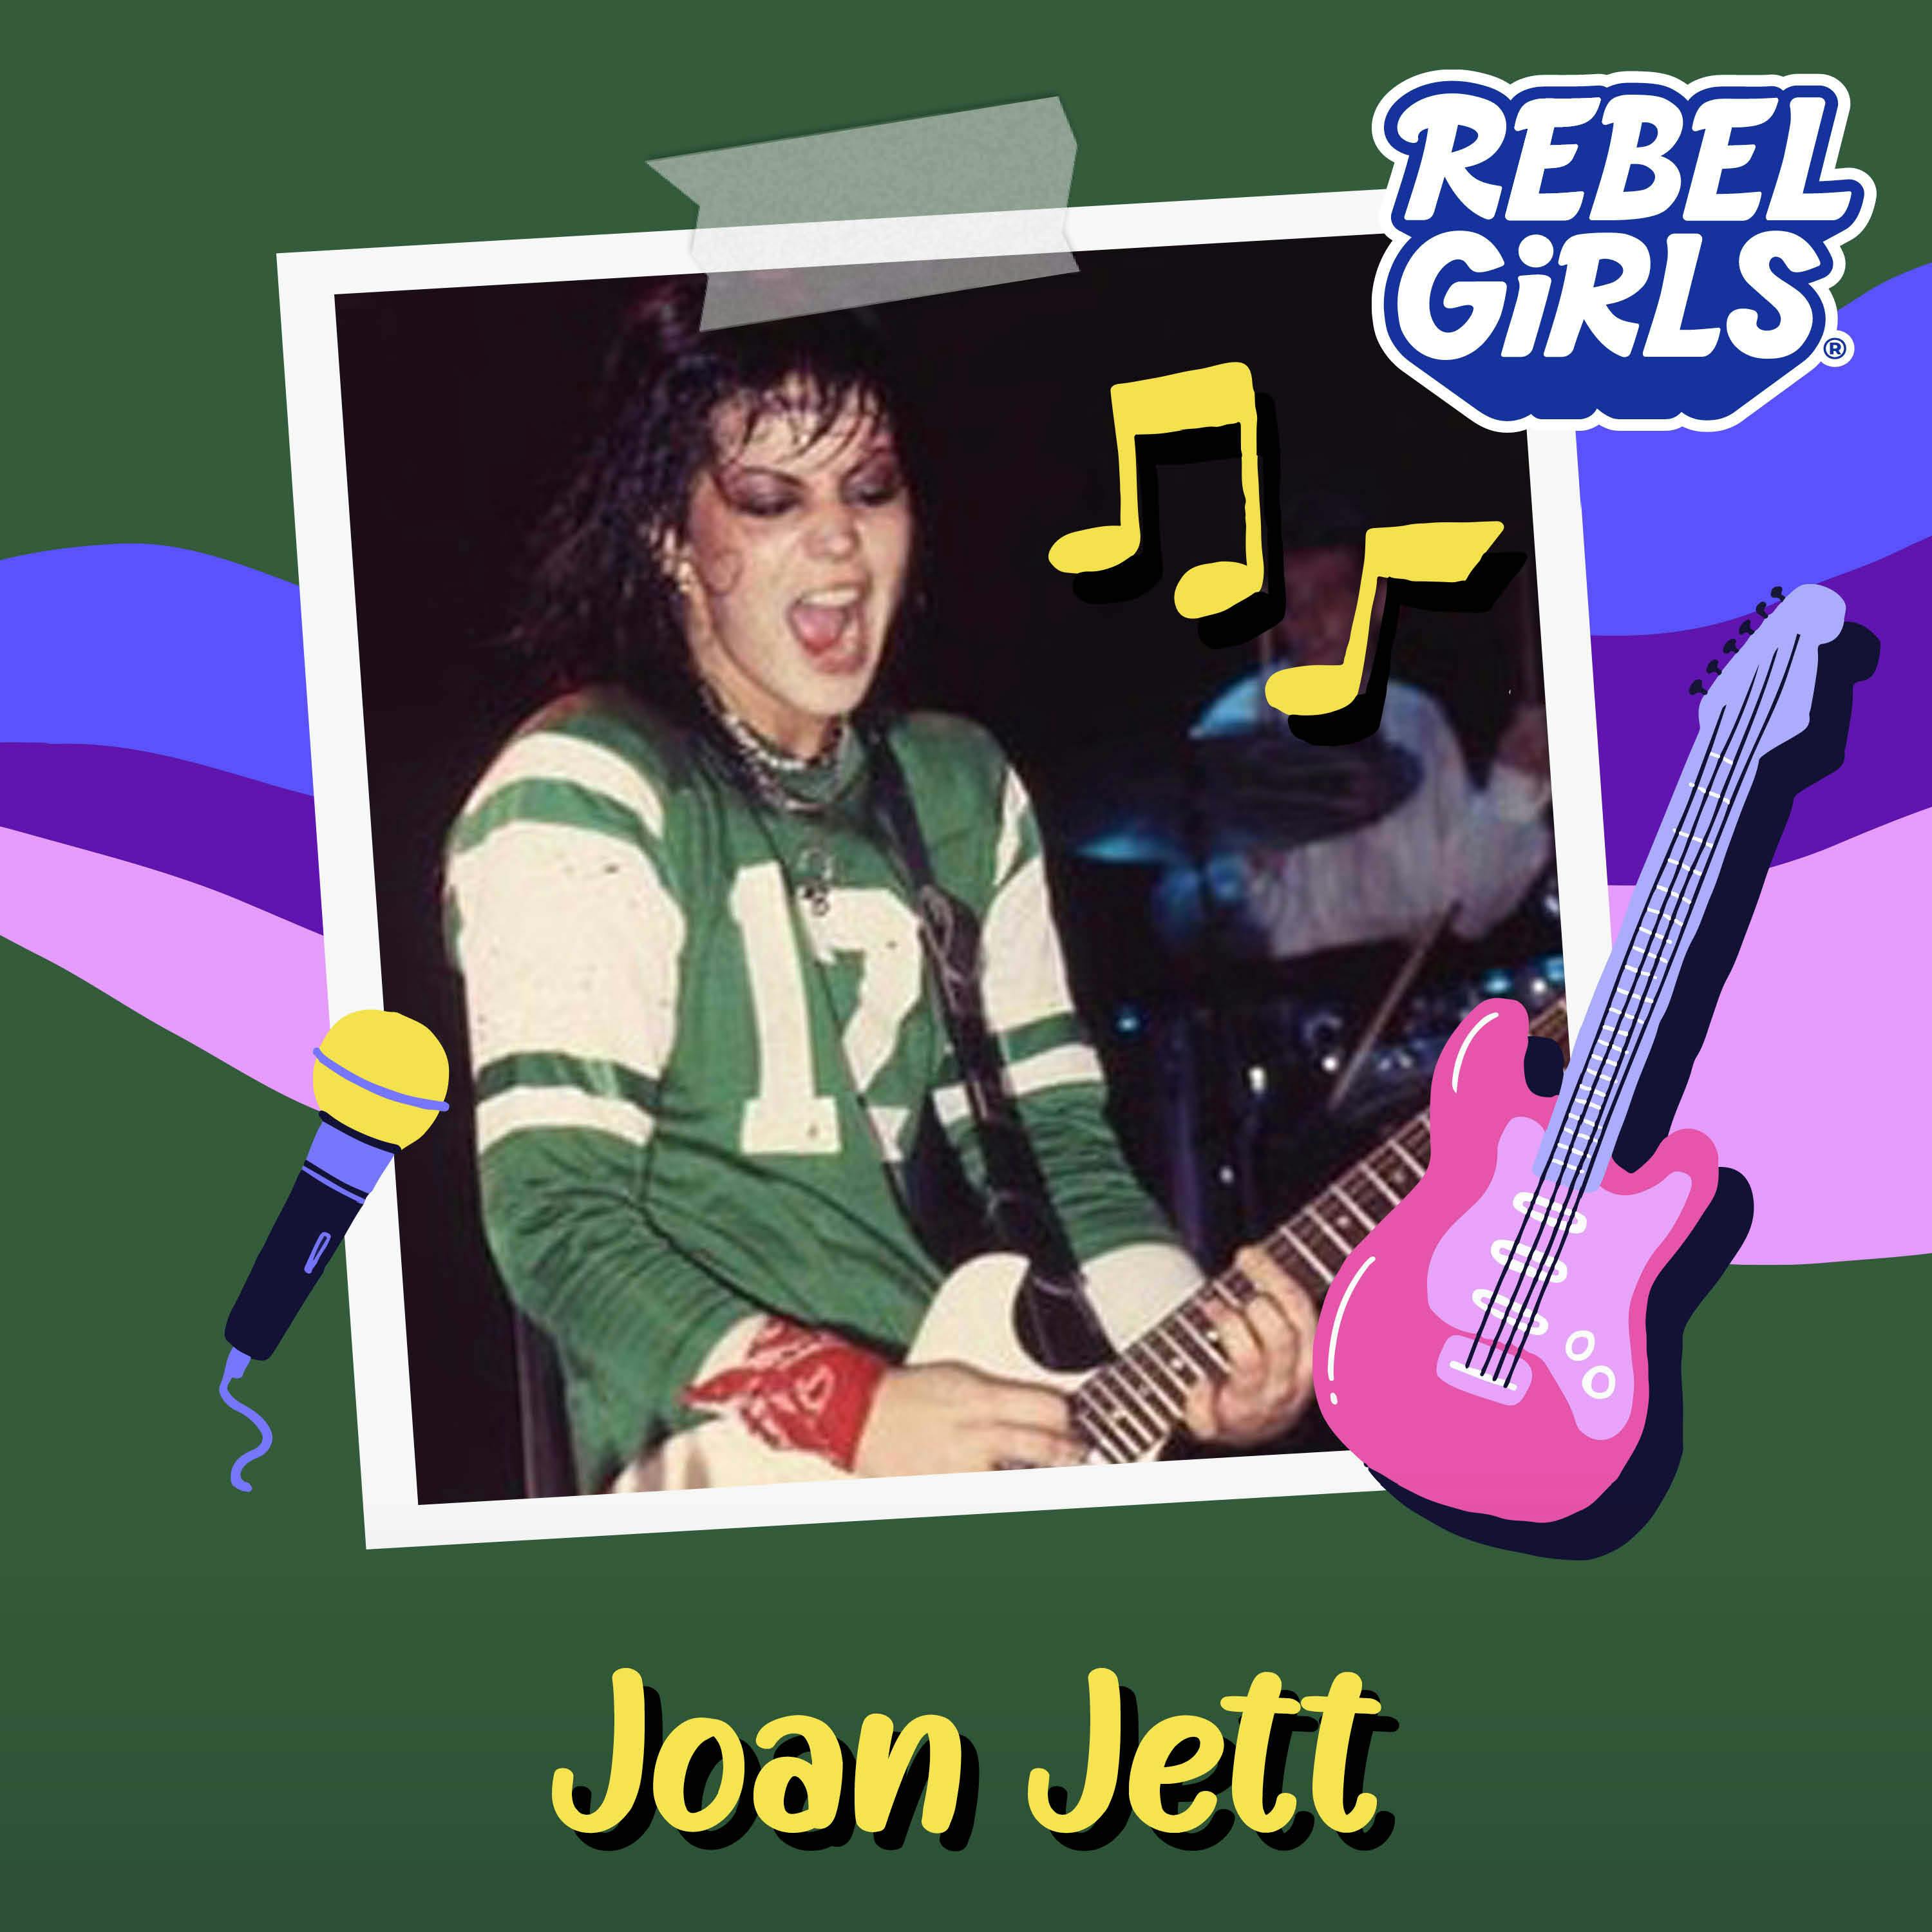 Get to Know Joan Jett